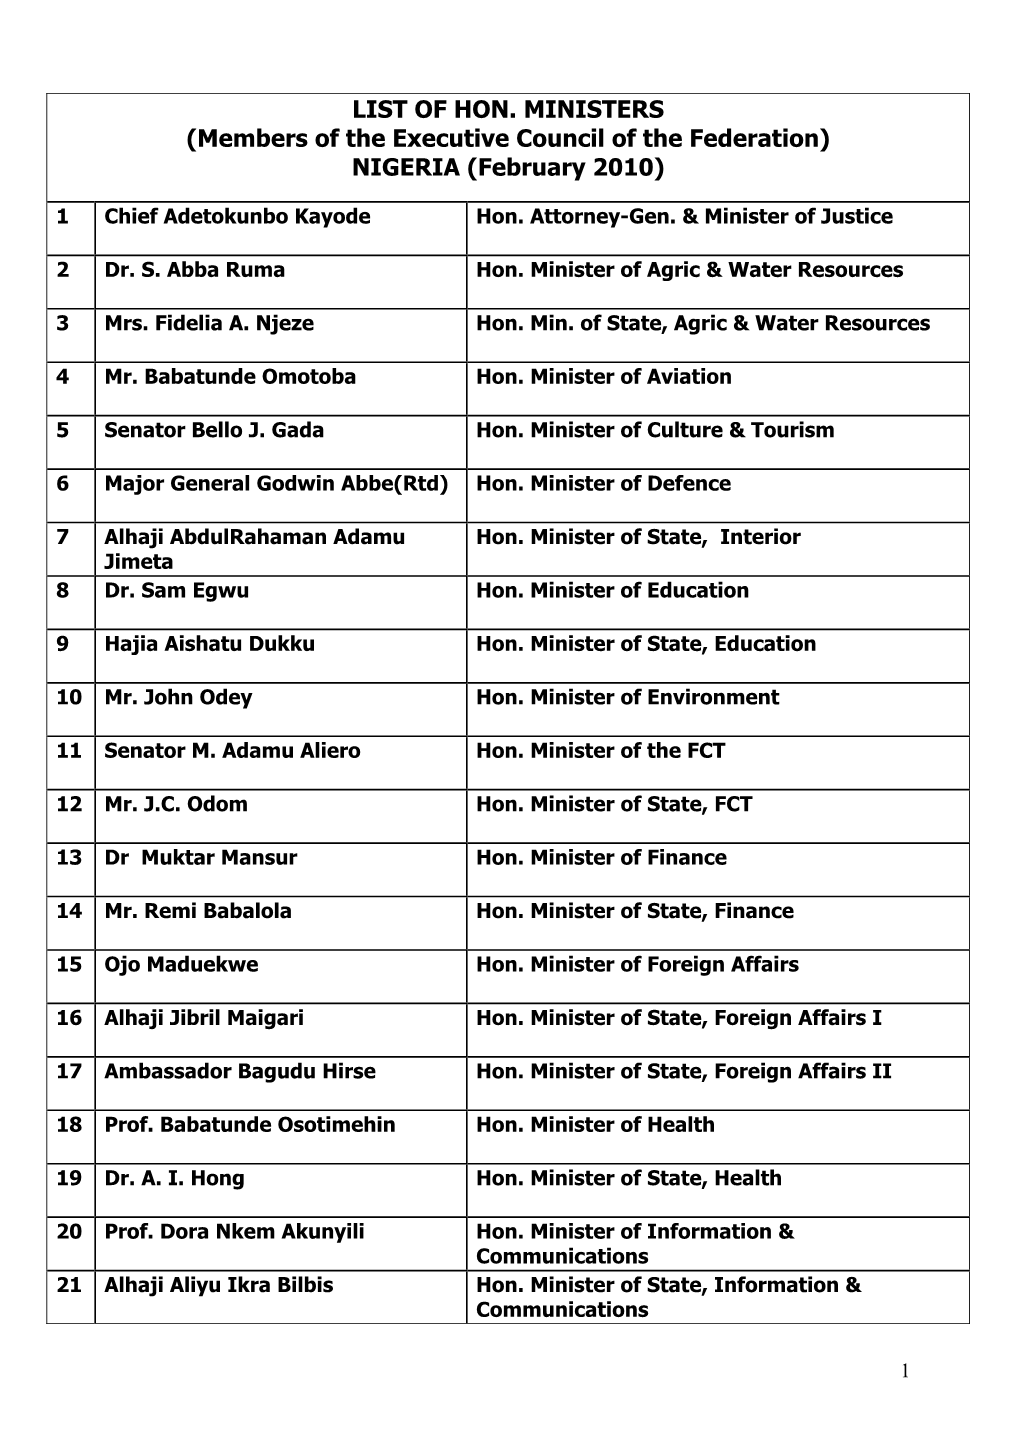 LIST of HON. MINISTERS (Members of the Executive Council of the Federation) NIGERIA (February 2010)